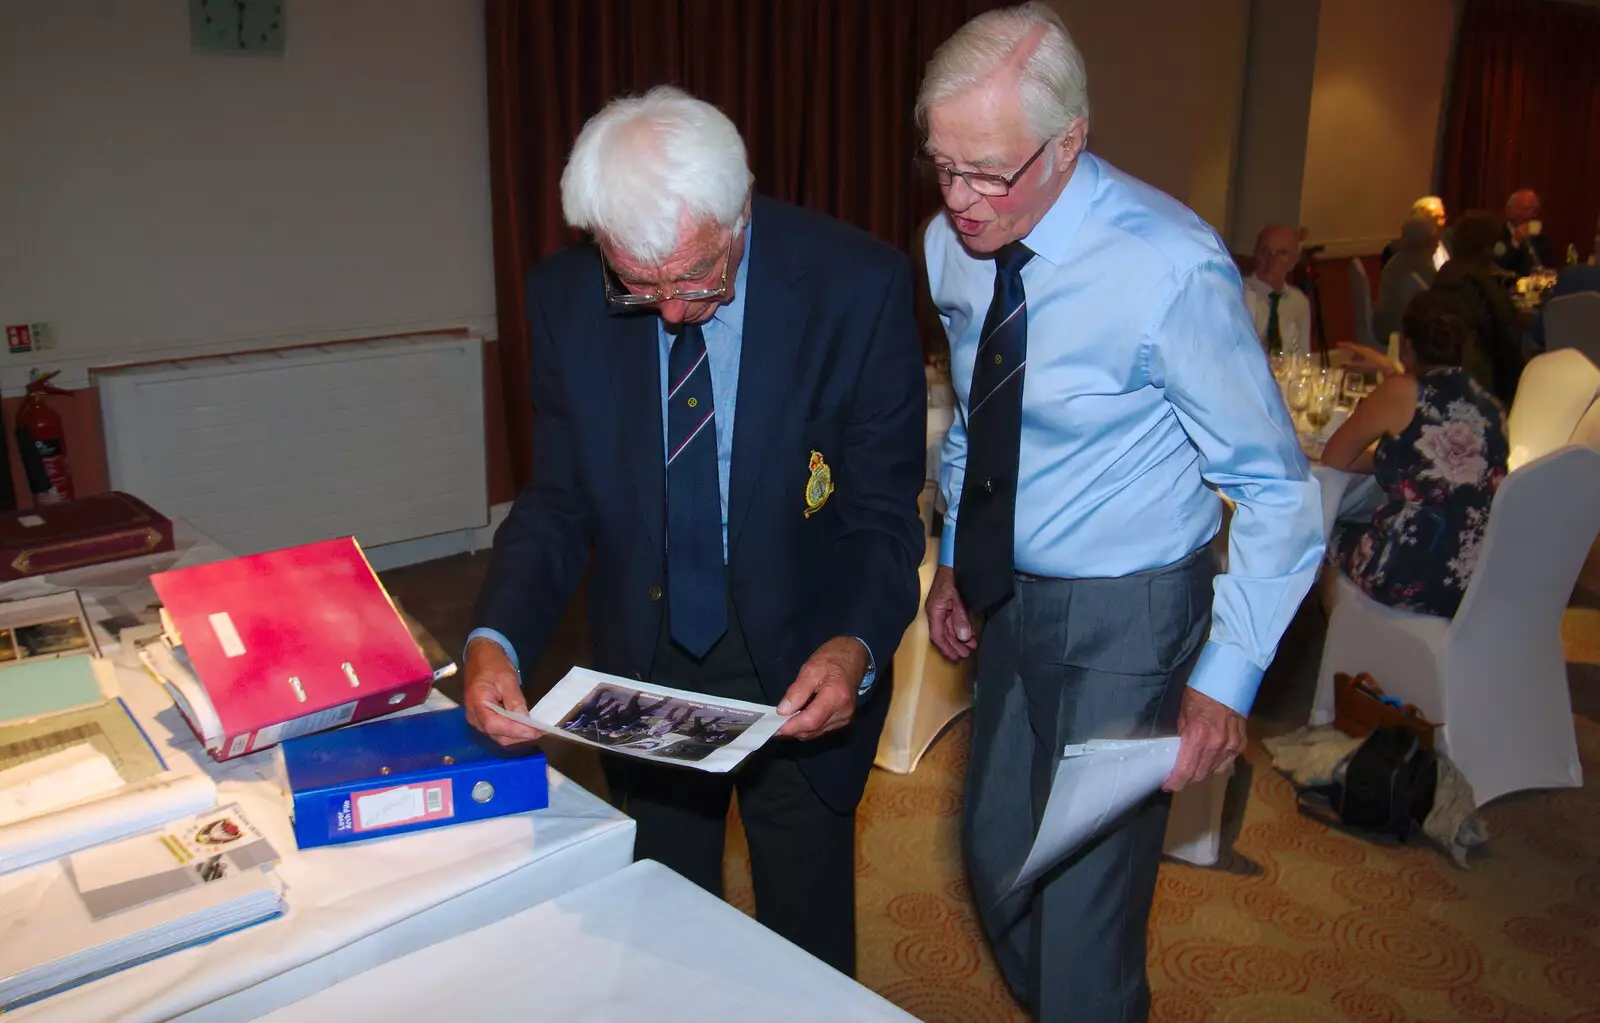 Some photos are pinched out of the history collection, from Kenilworth Castle and the 69th Entry Reunion Dinner, Stratford, Warwickshire - 14th September 2019